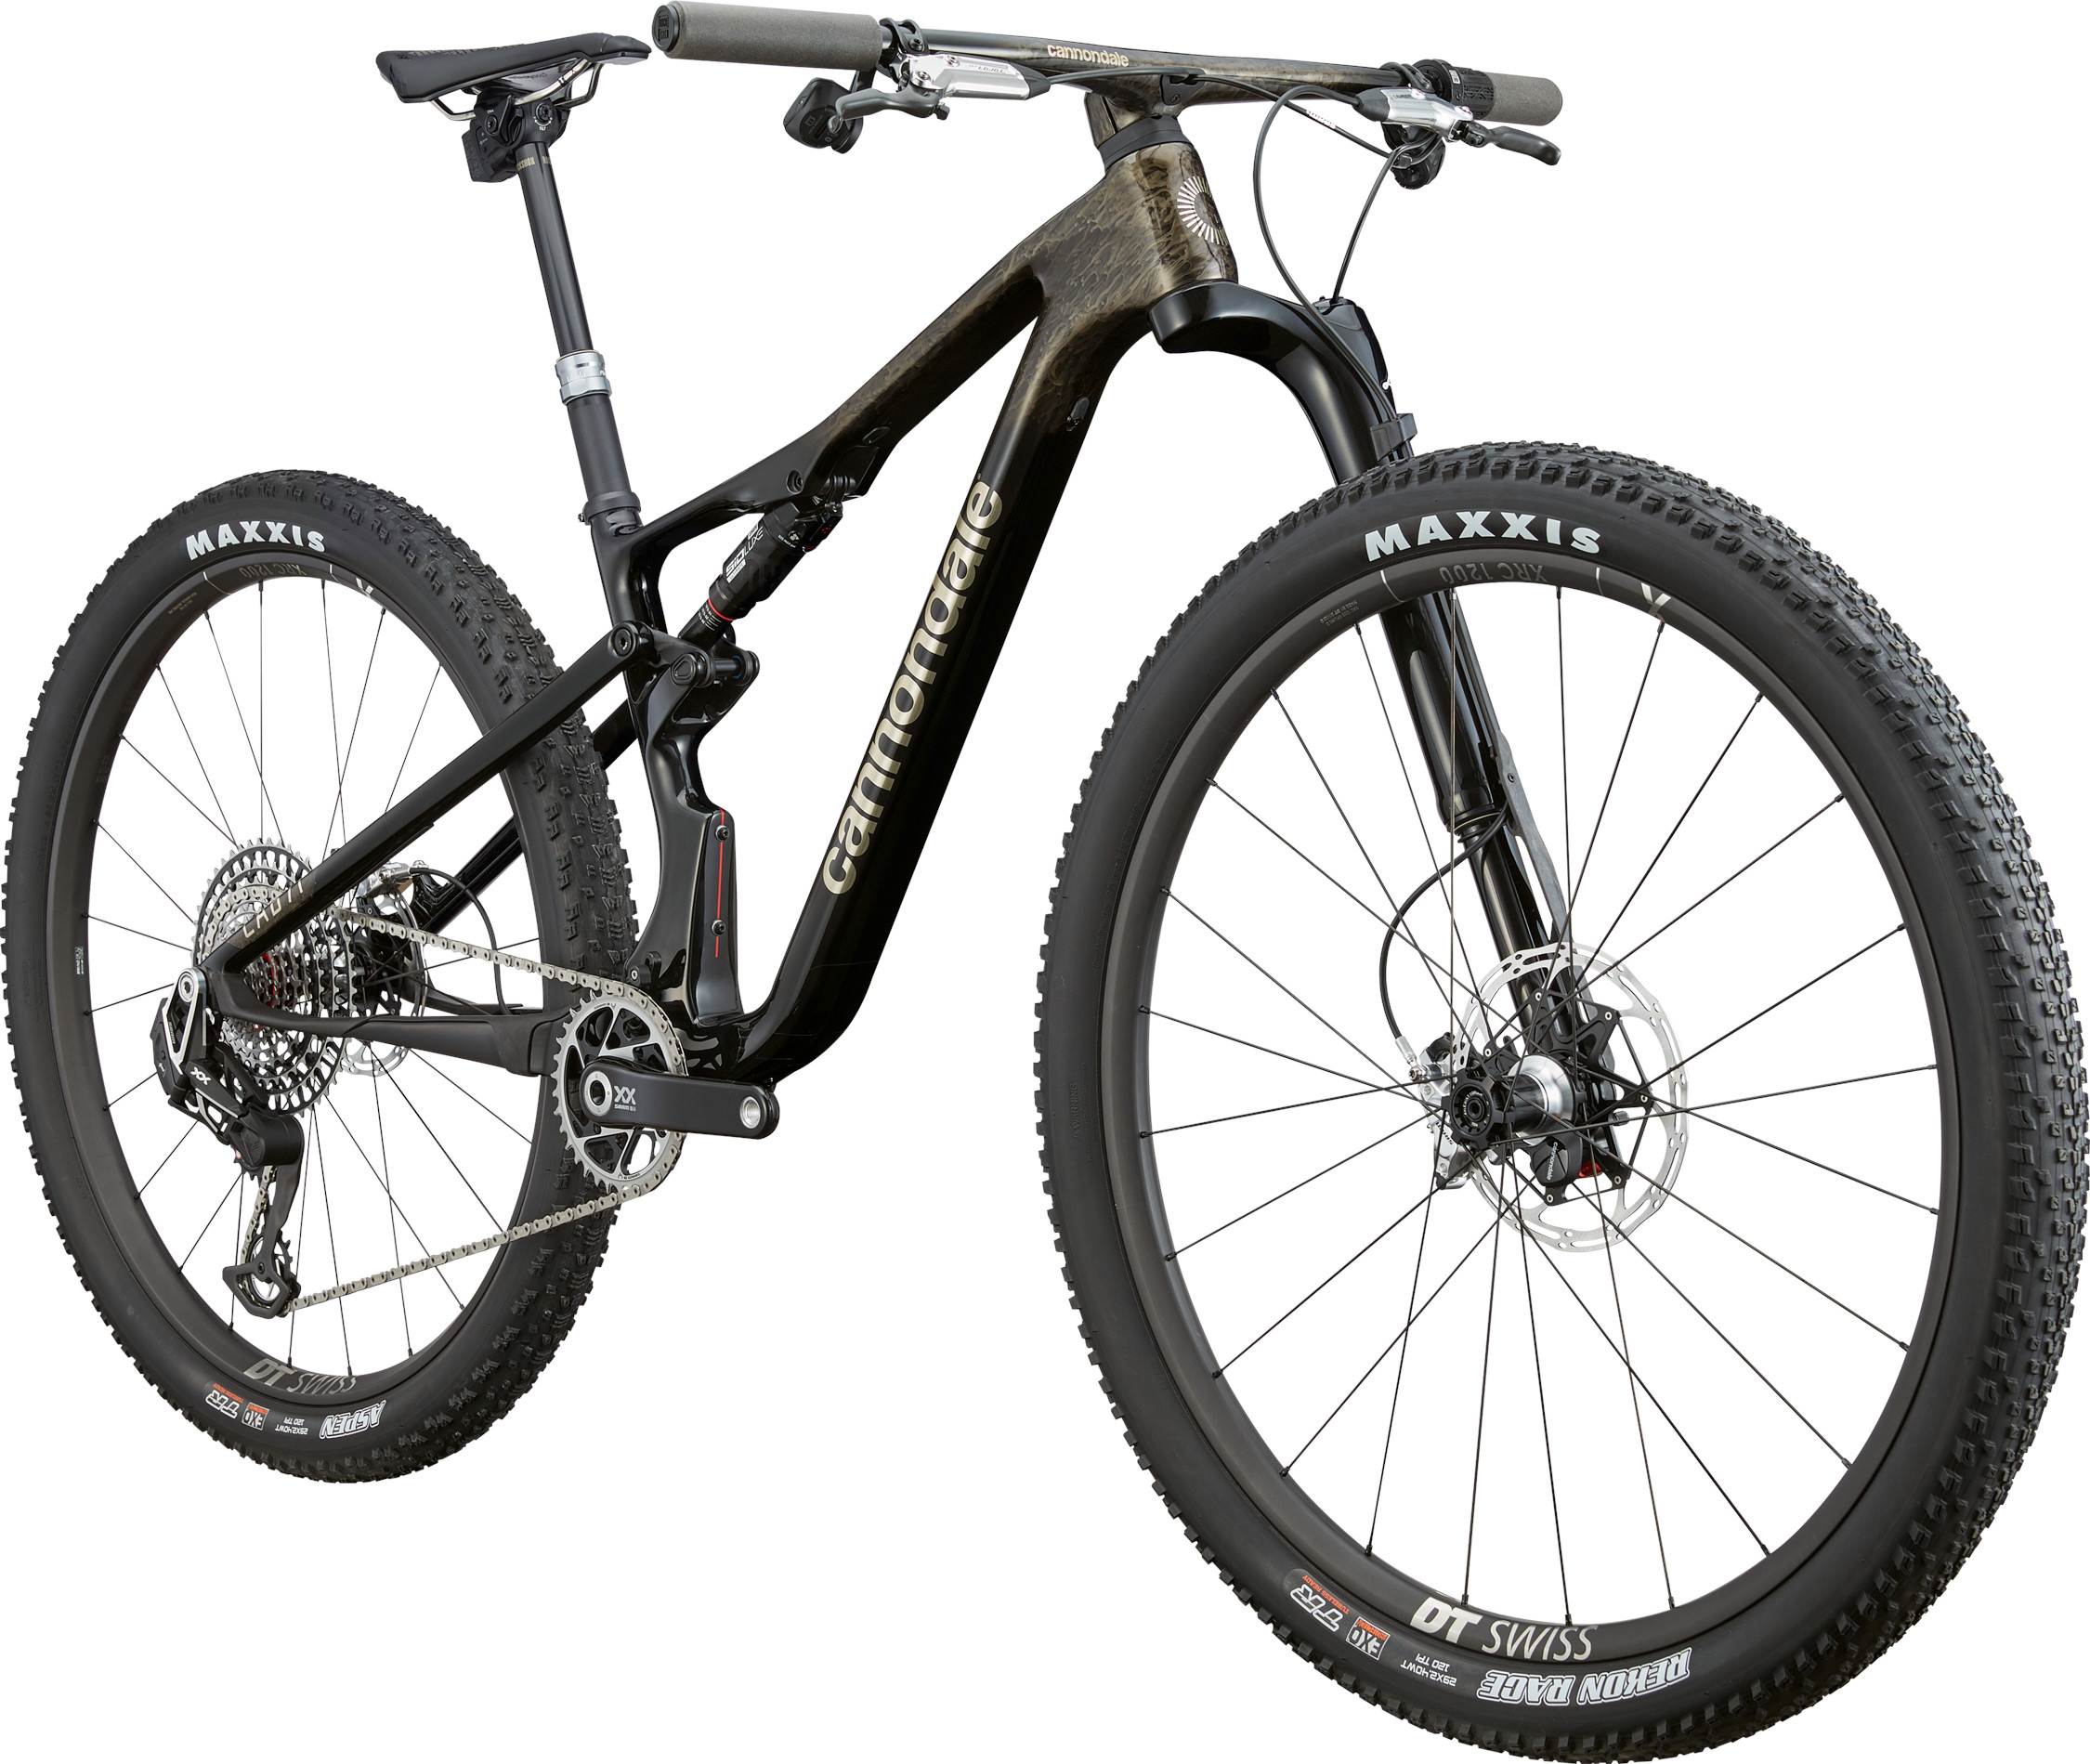 Cannondale Updates Scalpel with 120 Travel Front and Rear Plus One Piece Carbon Bar